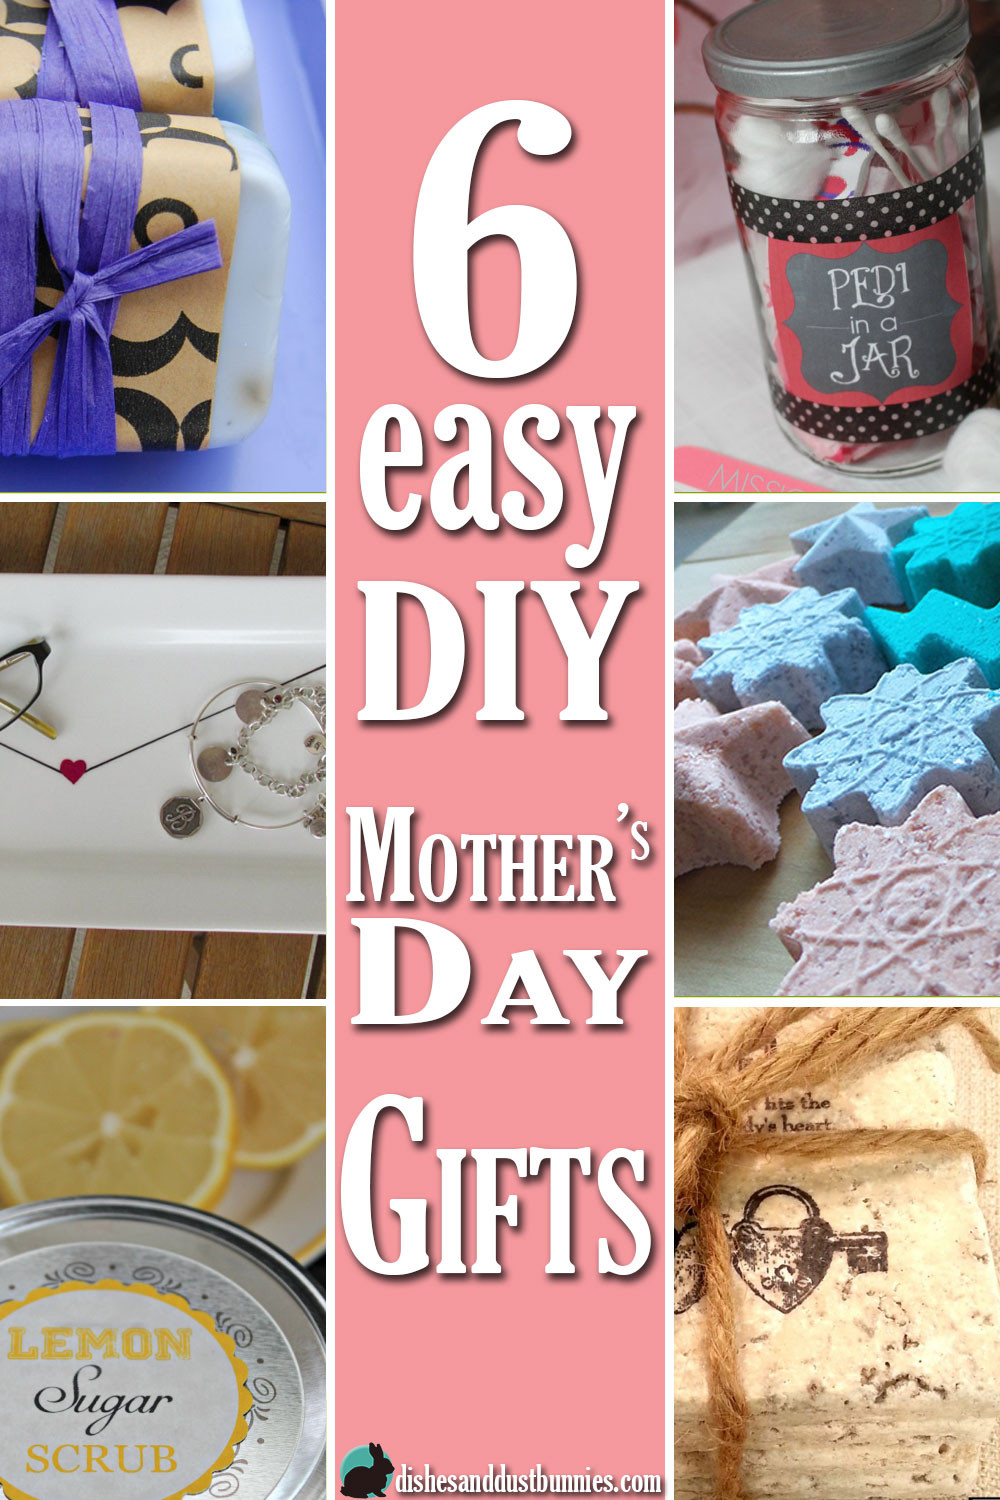 Easy DIY Gifts For Mom
 6 Easy DIY Mother s Day Gifts Dishes and Dust Bunnies